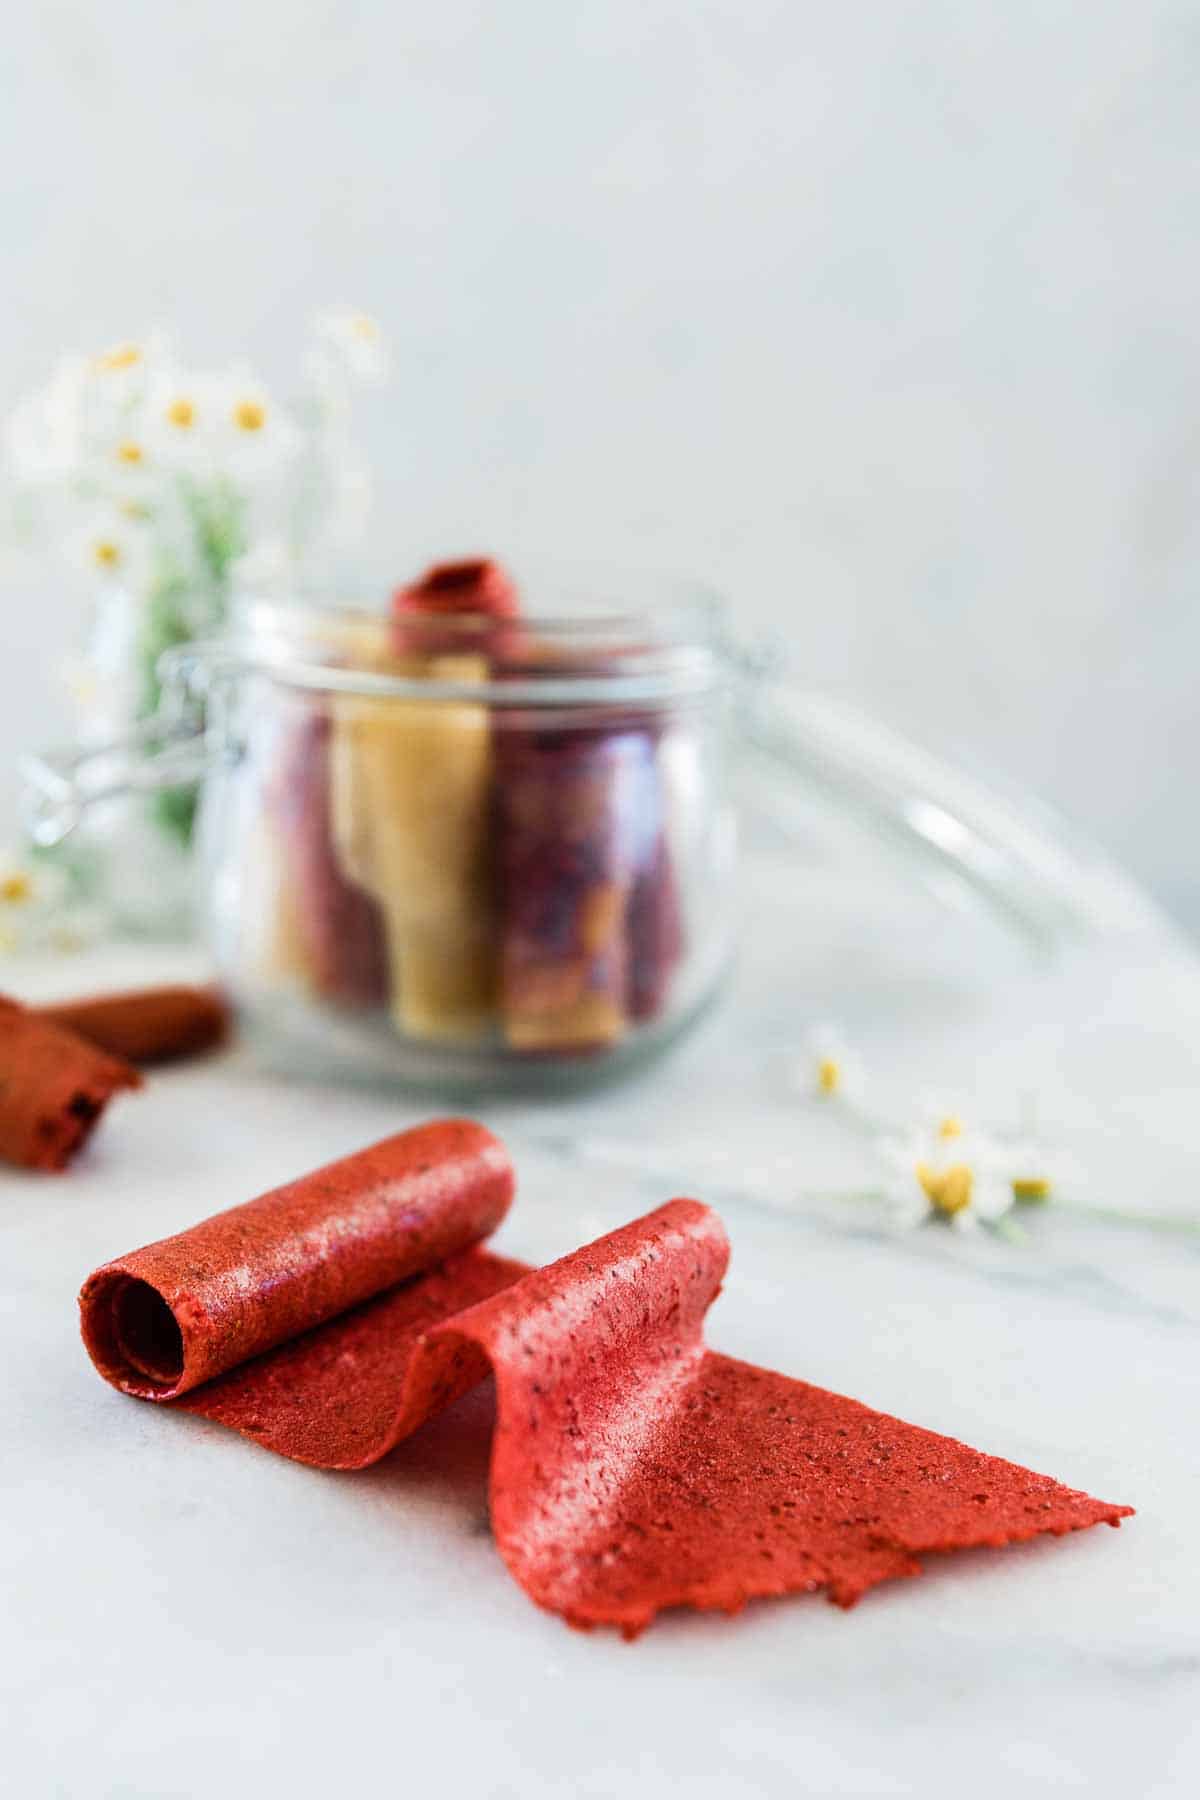 Homemade fruit leather slightly rolled out onto a marble counter. There is a container of fruit leathers in the background.